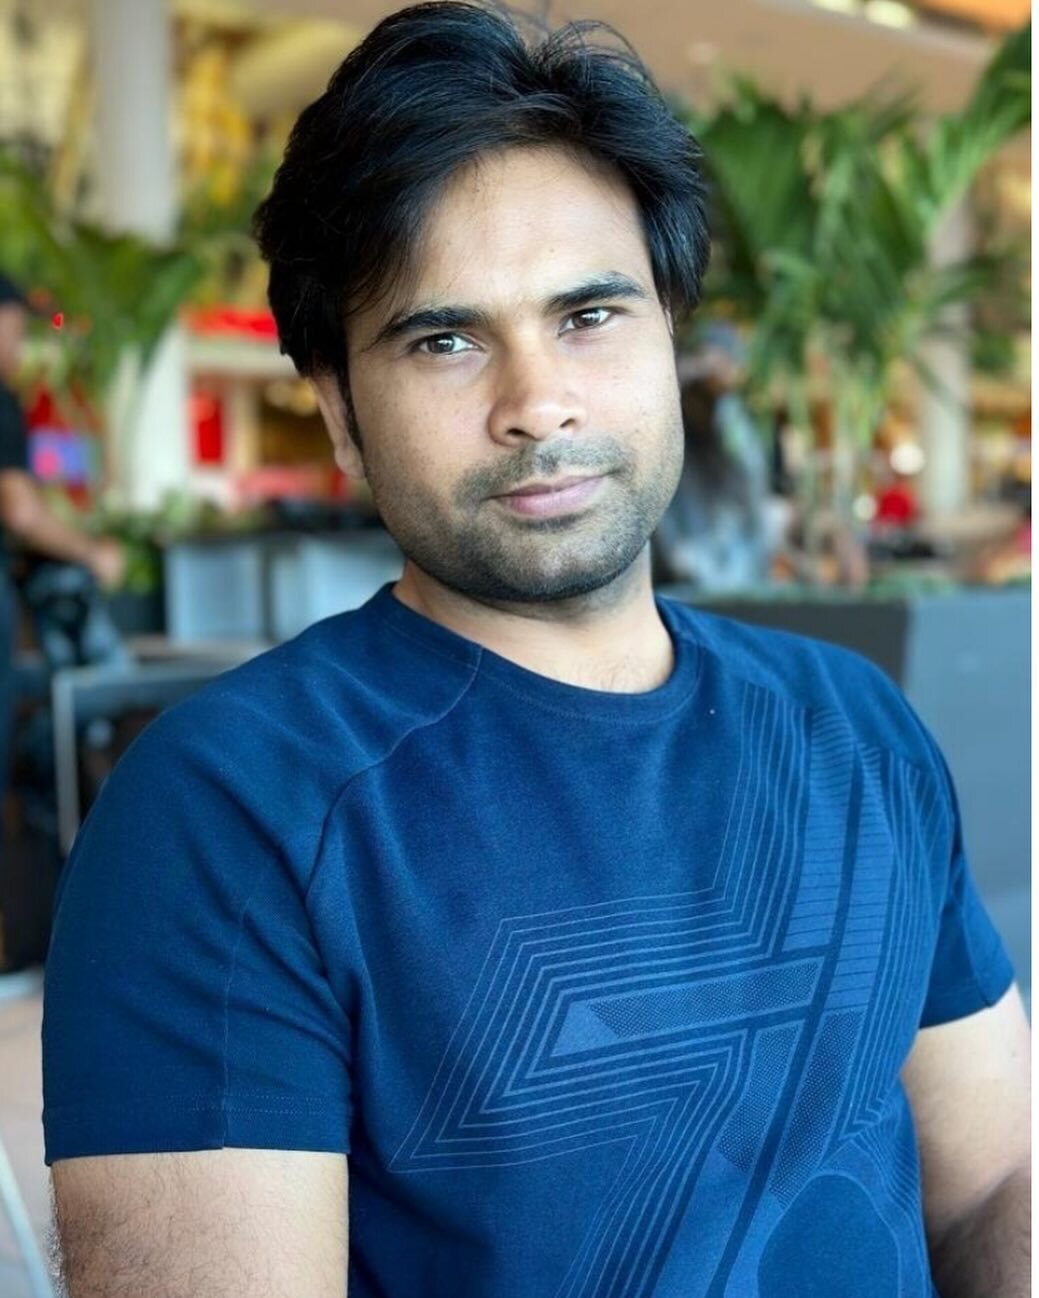 Introducing our new post doc who joined Kim Lab last September&mdash; Kuldeep Giri! 

Kuldeep successfully completed his PhD from Indian Institute of Technology Roorkee (IITR), India. His research focus lies in mass spectrometry-based proteomics to u